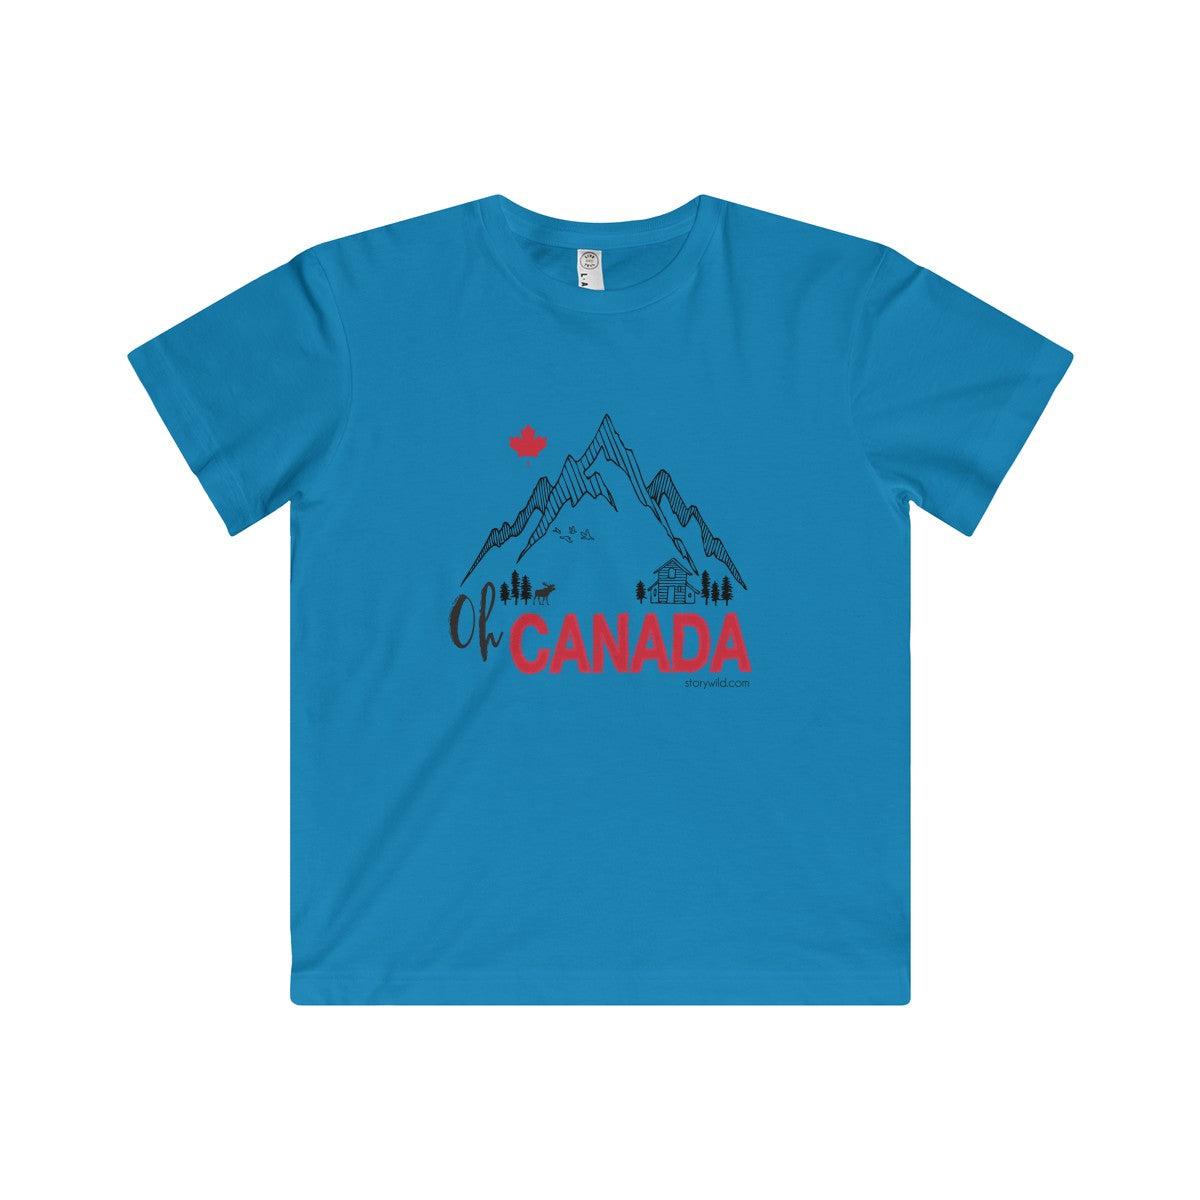 Oh Canada! A CANADIAN kids Fine Jersey Tee